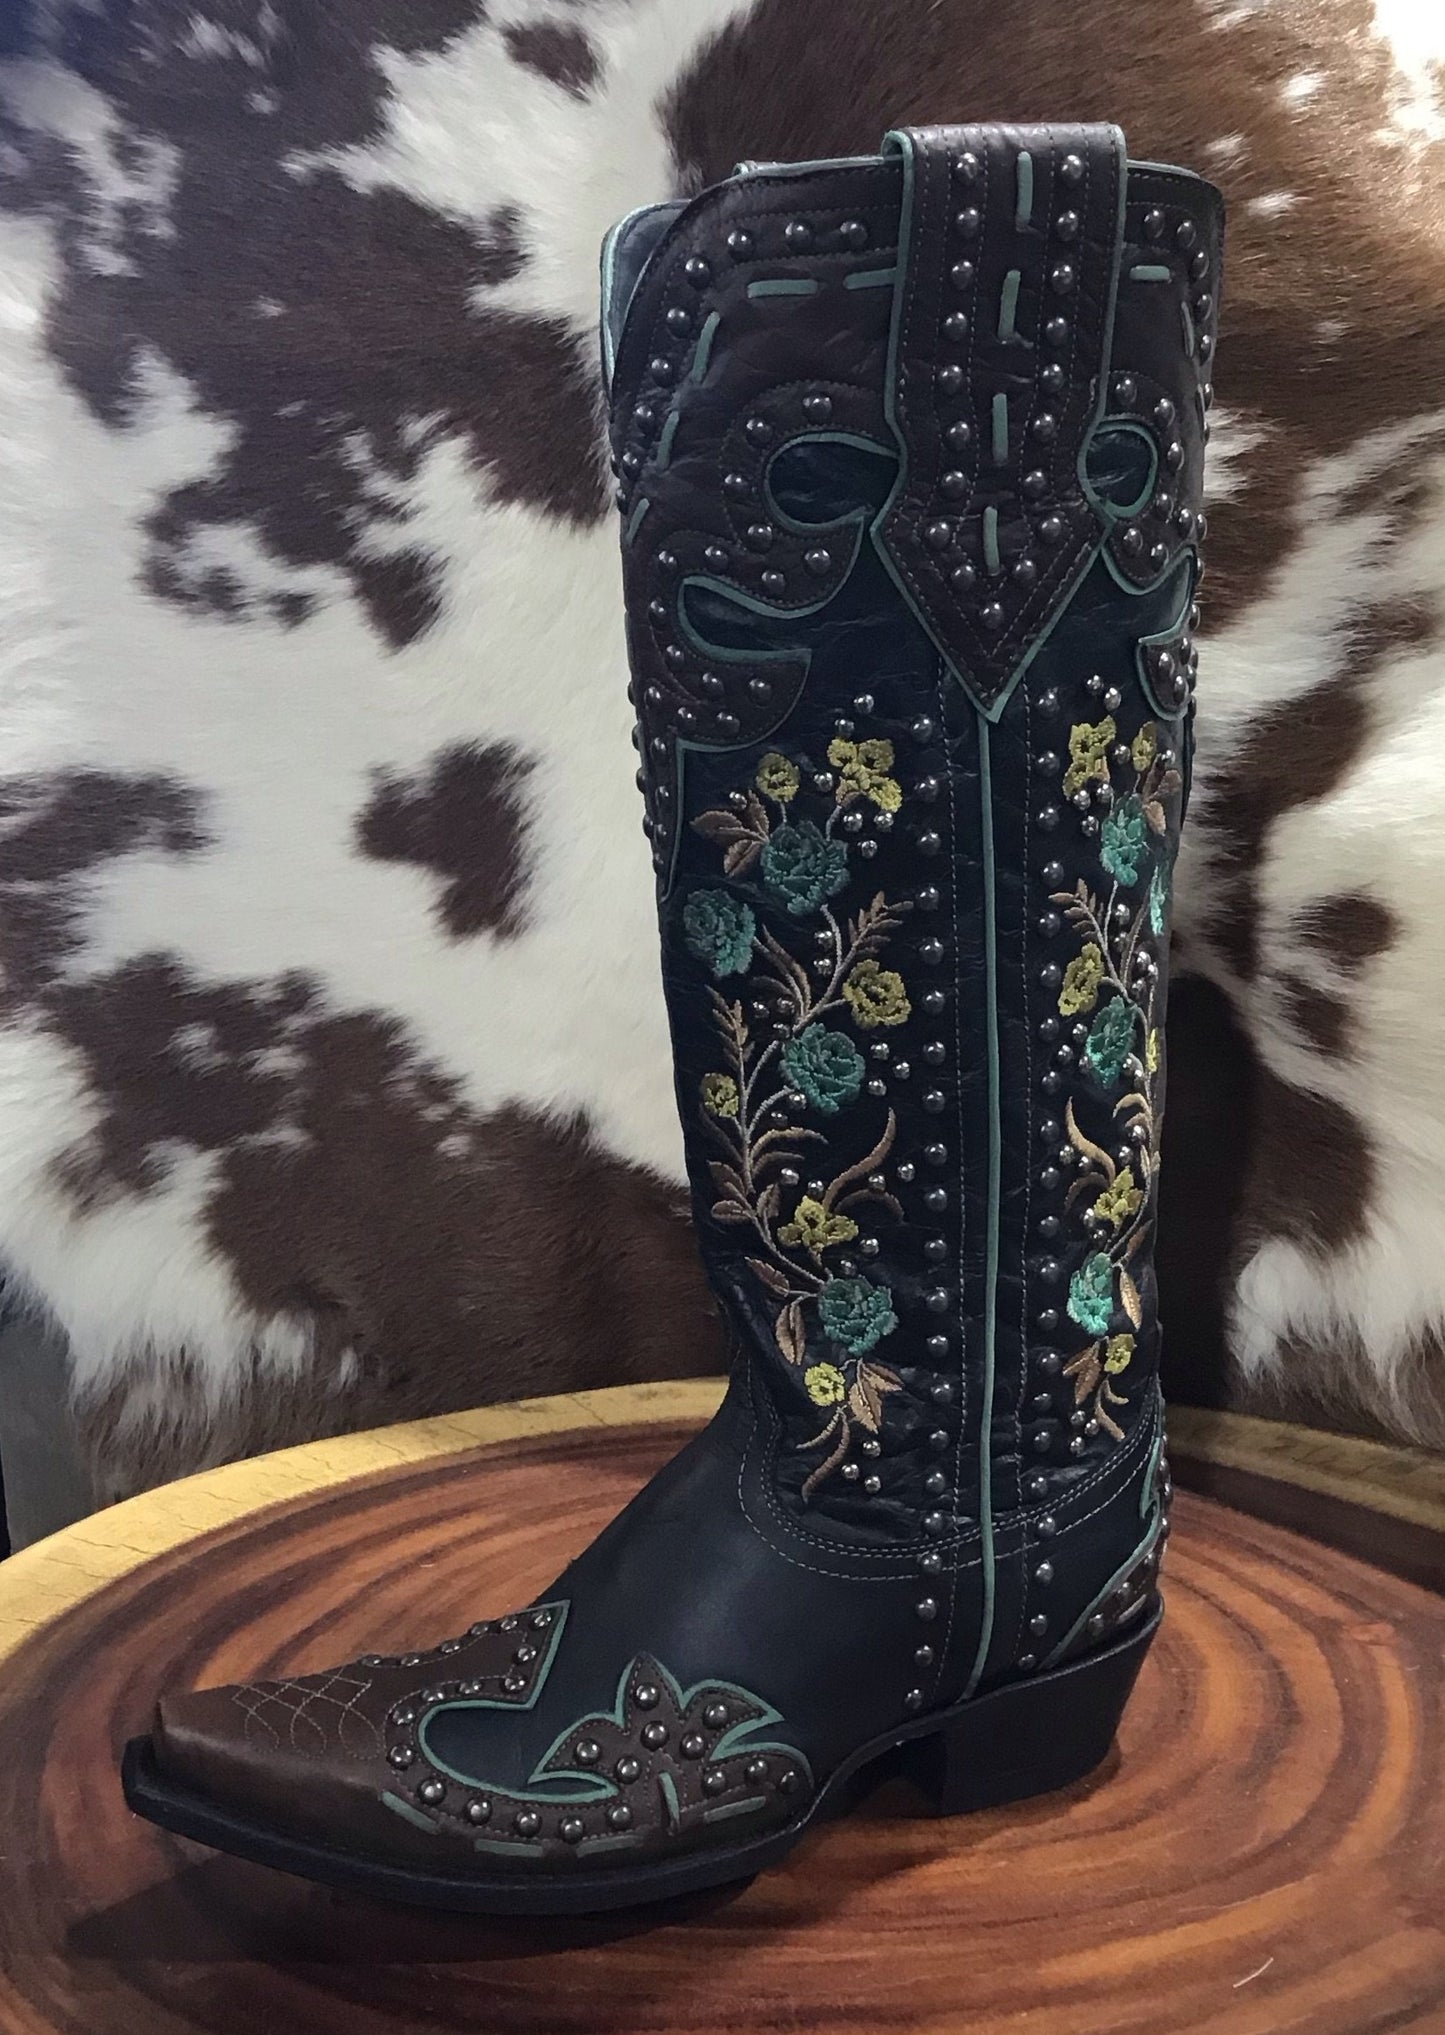 OLD GRINGO DOUBLE D RANCH "ROUND UP ROSIE" BOOTS *SALE*